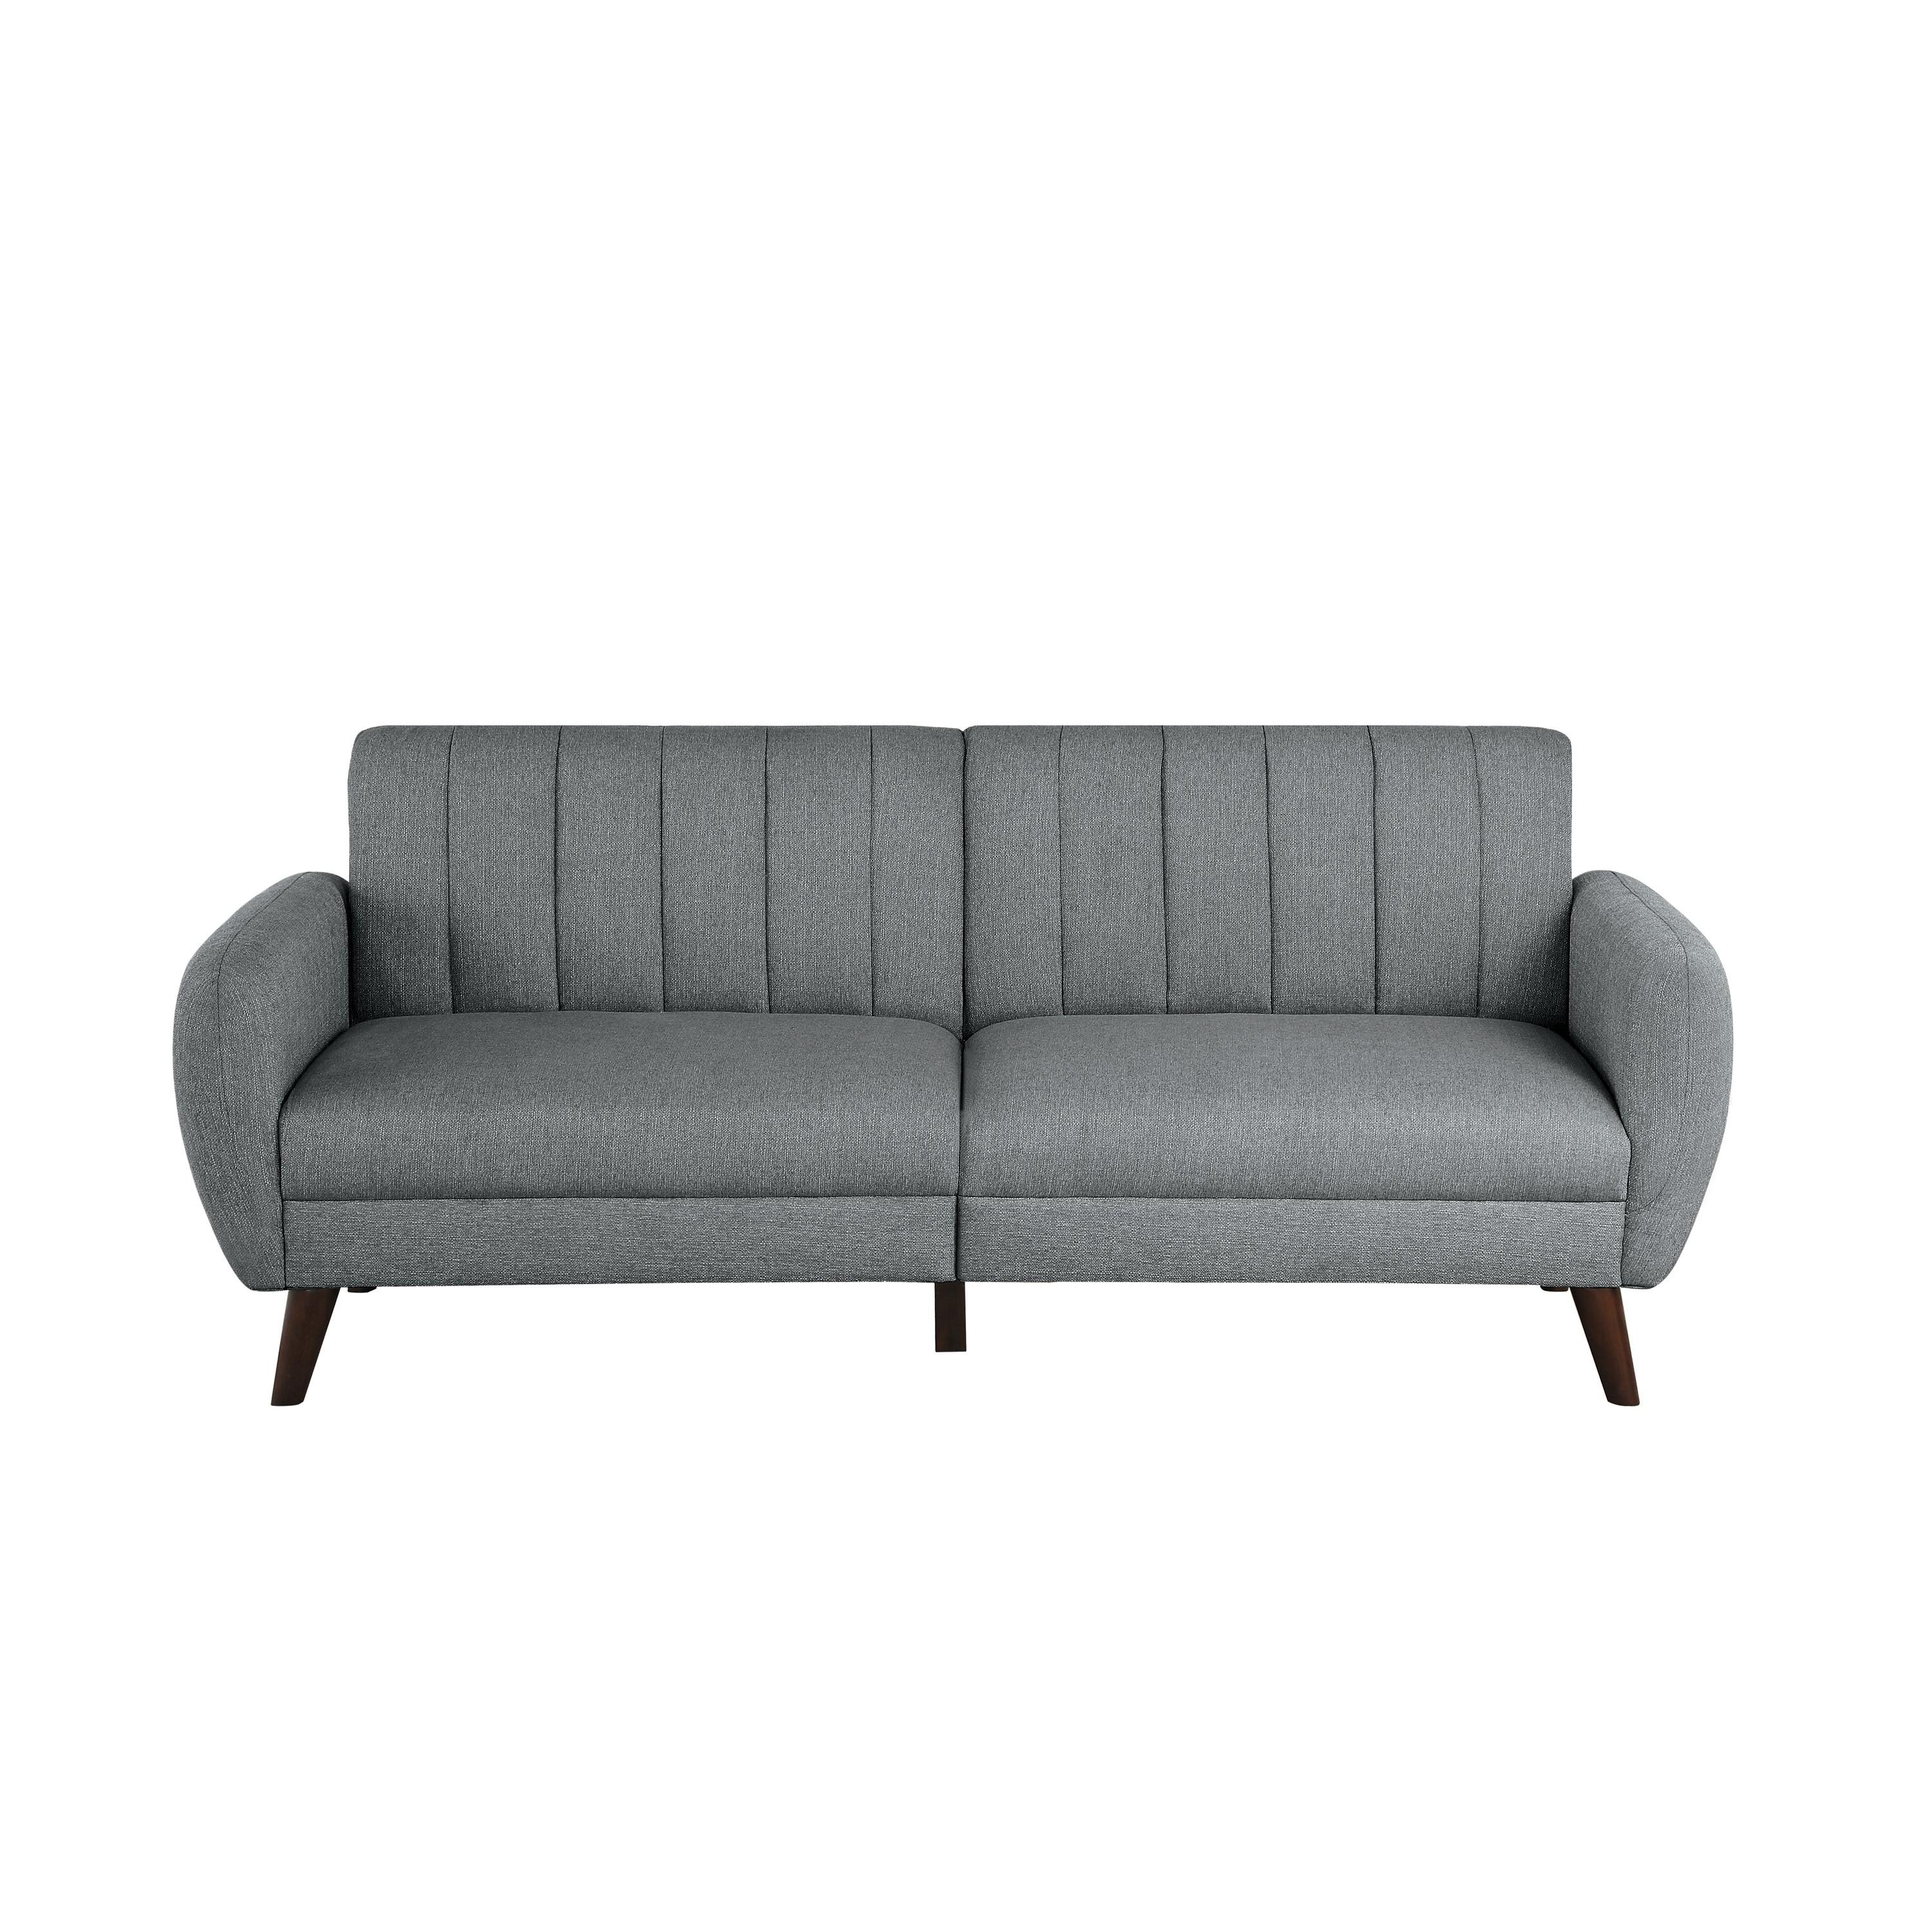 Transitional Sofa 9833GY-3CL Gabi 9833GY-3CL in Gray Fabric